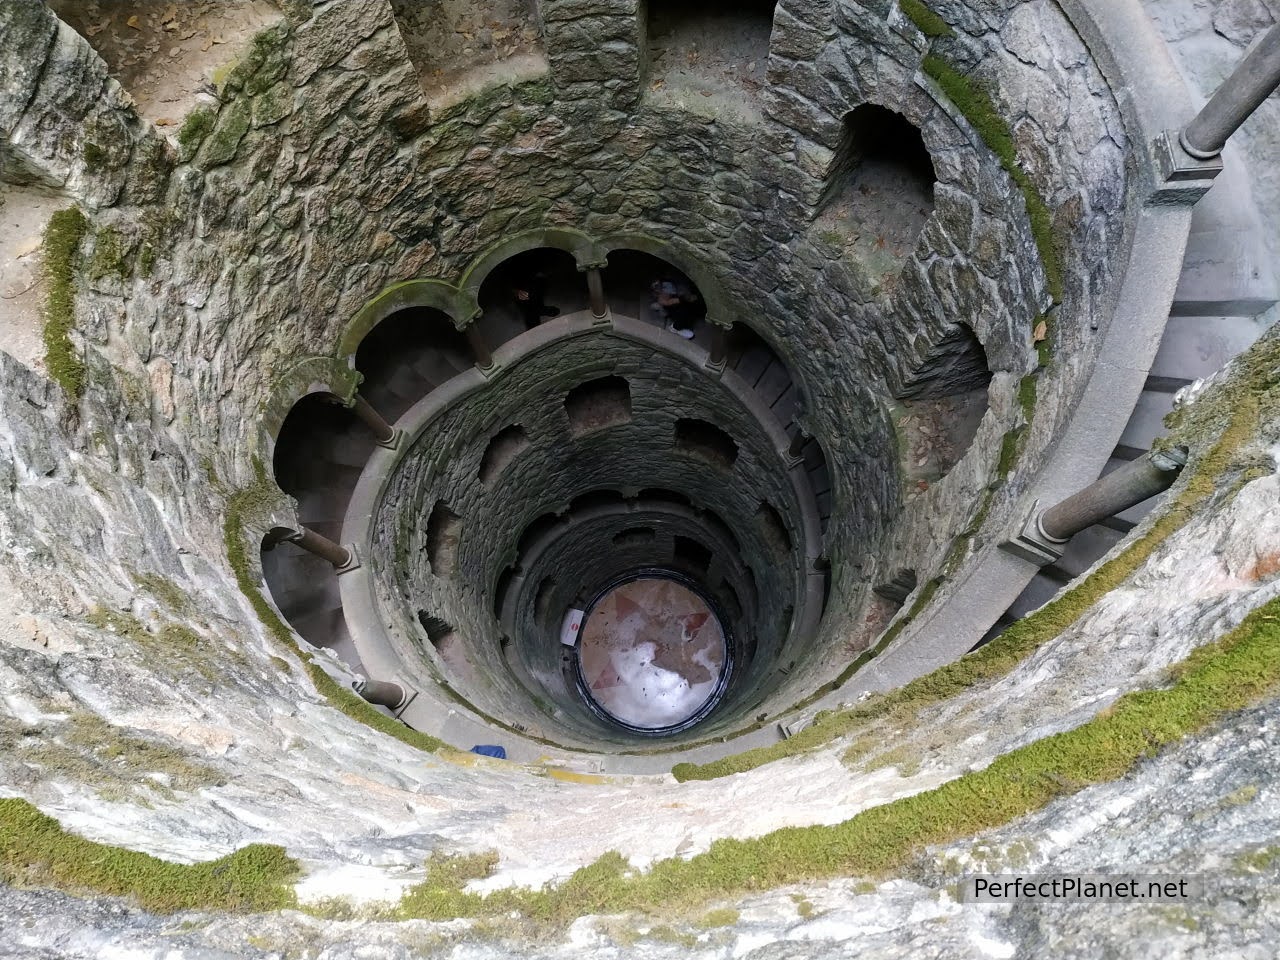 Initiation well